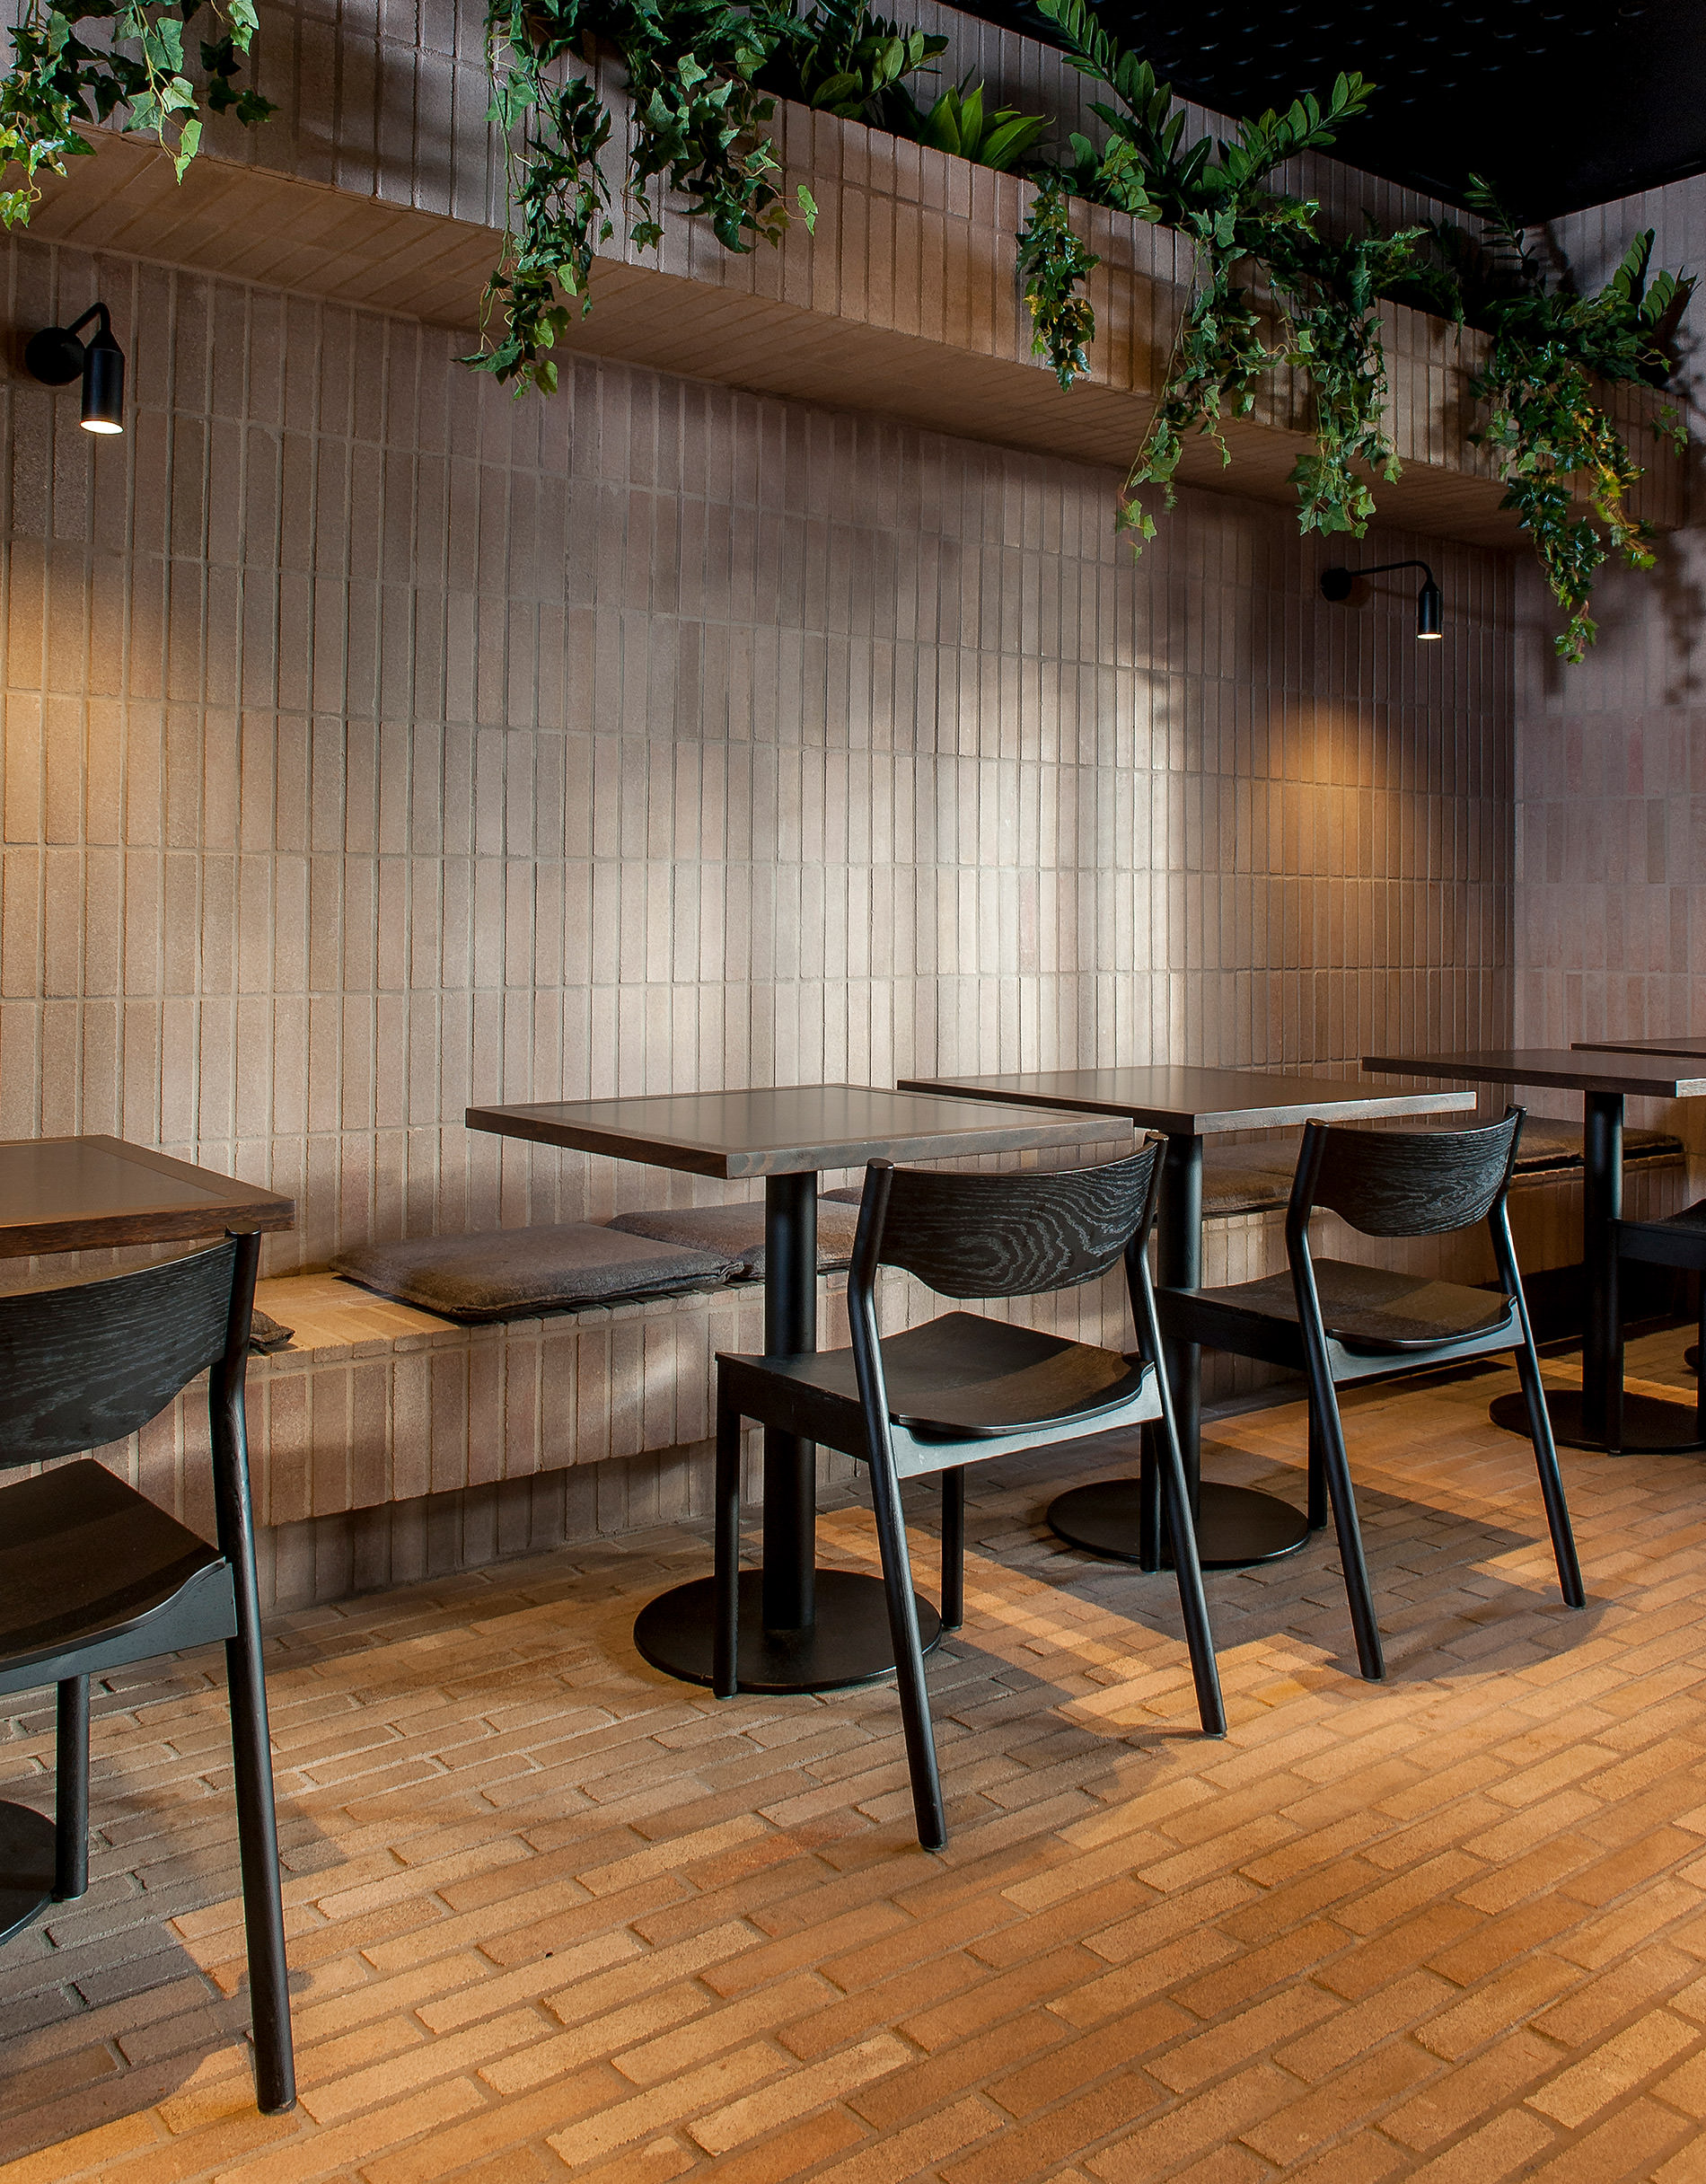 As you move through the pizzeria you can see why it has won design awards with its beautiful brickwork and warm solid oak tables be Australian designer FrancoCrea